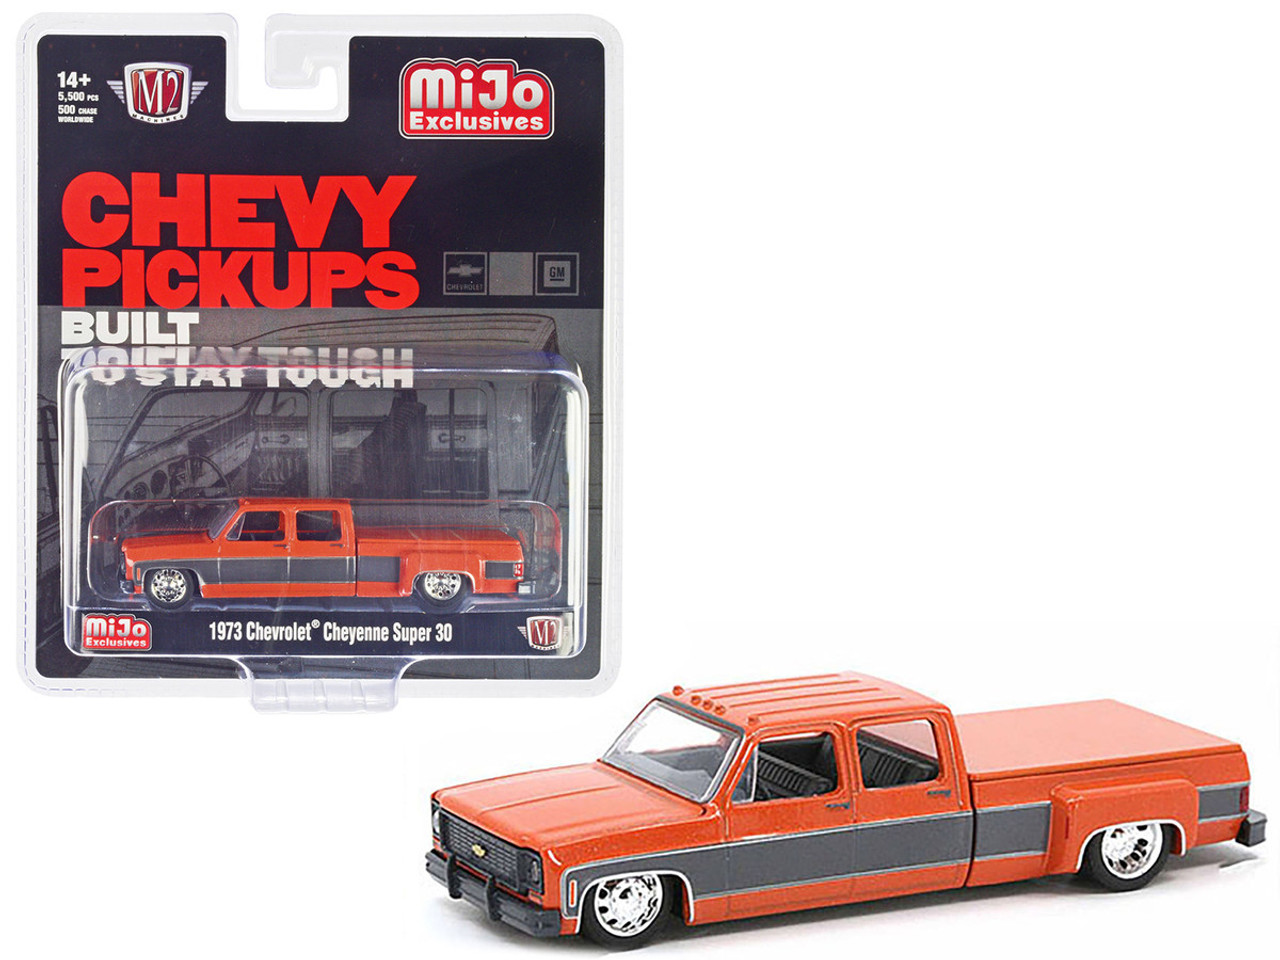 1973 Chevrolet Cheyenne Super 30 Pickup Truck Orange with Gray Sides Limited Edition to 5500 pieces Worldwide 1/64 Diecast Model Car by M2 Machines